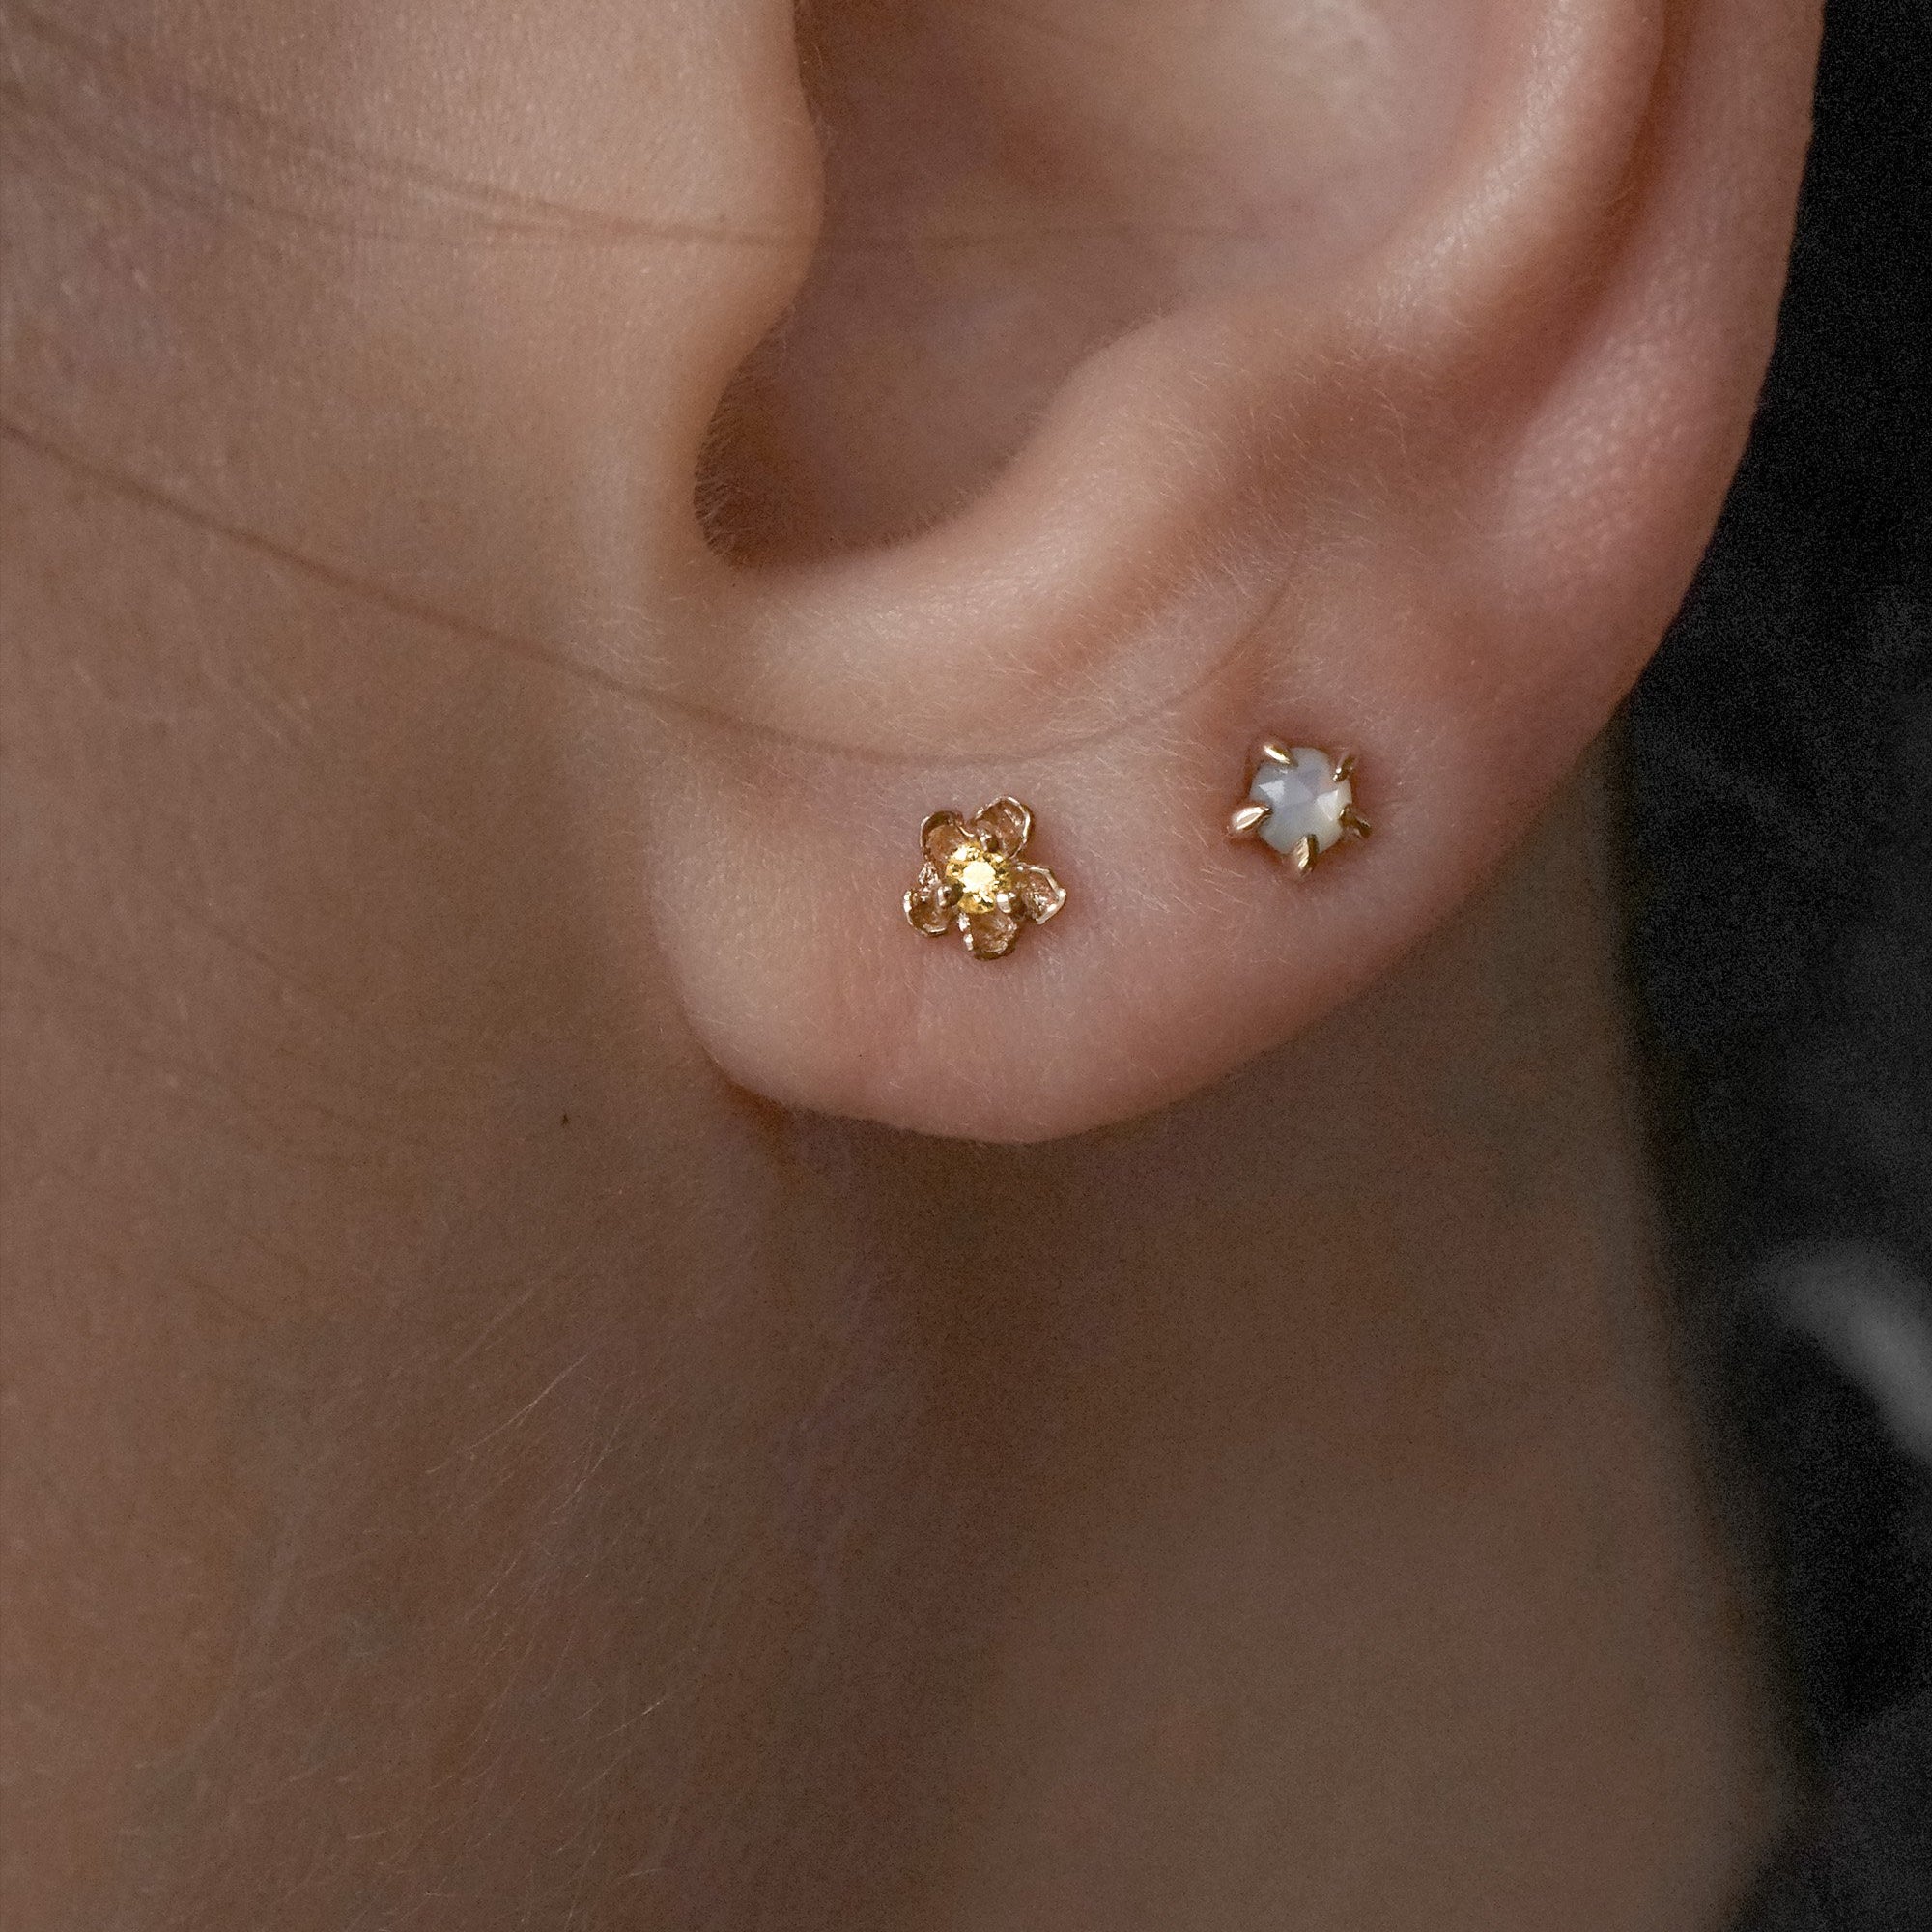 A close-up shot of an ear with two piercings wearing two petite studs by Laurie Fleming Jewellery. In the first hole, a "Buttercup Stud" with a hand-carved buttercup flower with a yellow sapphire, and in the second hole, a "Mother of Pearl Moondew Stud", with a rose cut mother of pearl stone held by five delicate claw-shaped prongs.